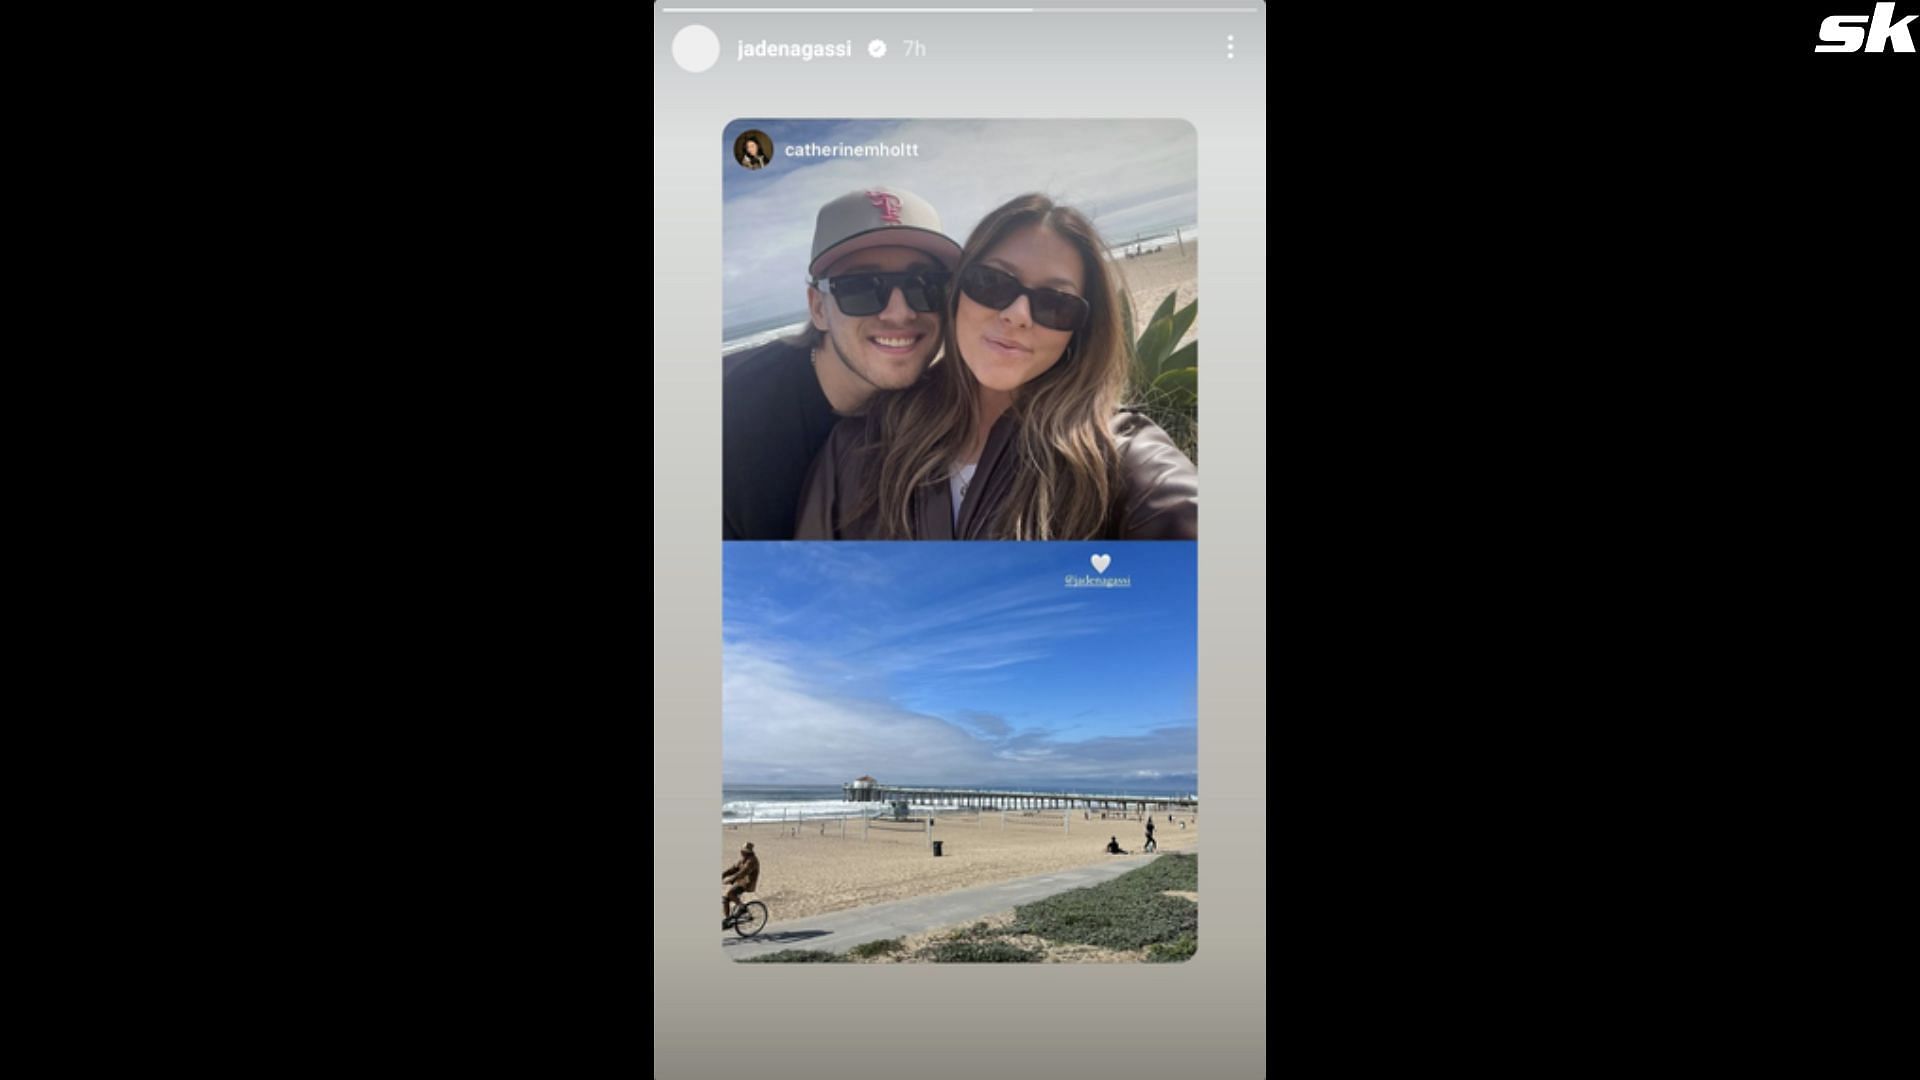 Jaden Agassi and girlfriend Catherine Holt enjoy their time at the beach